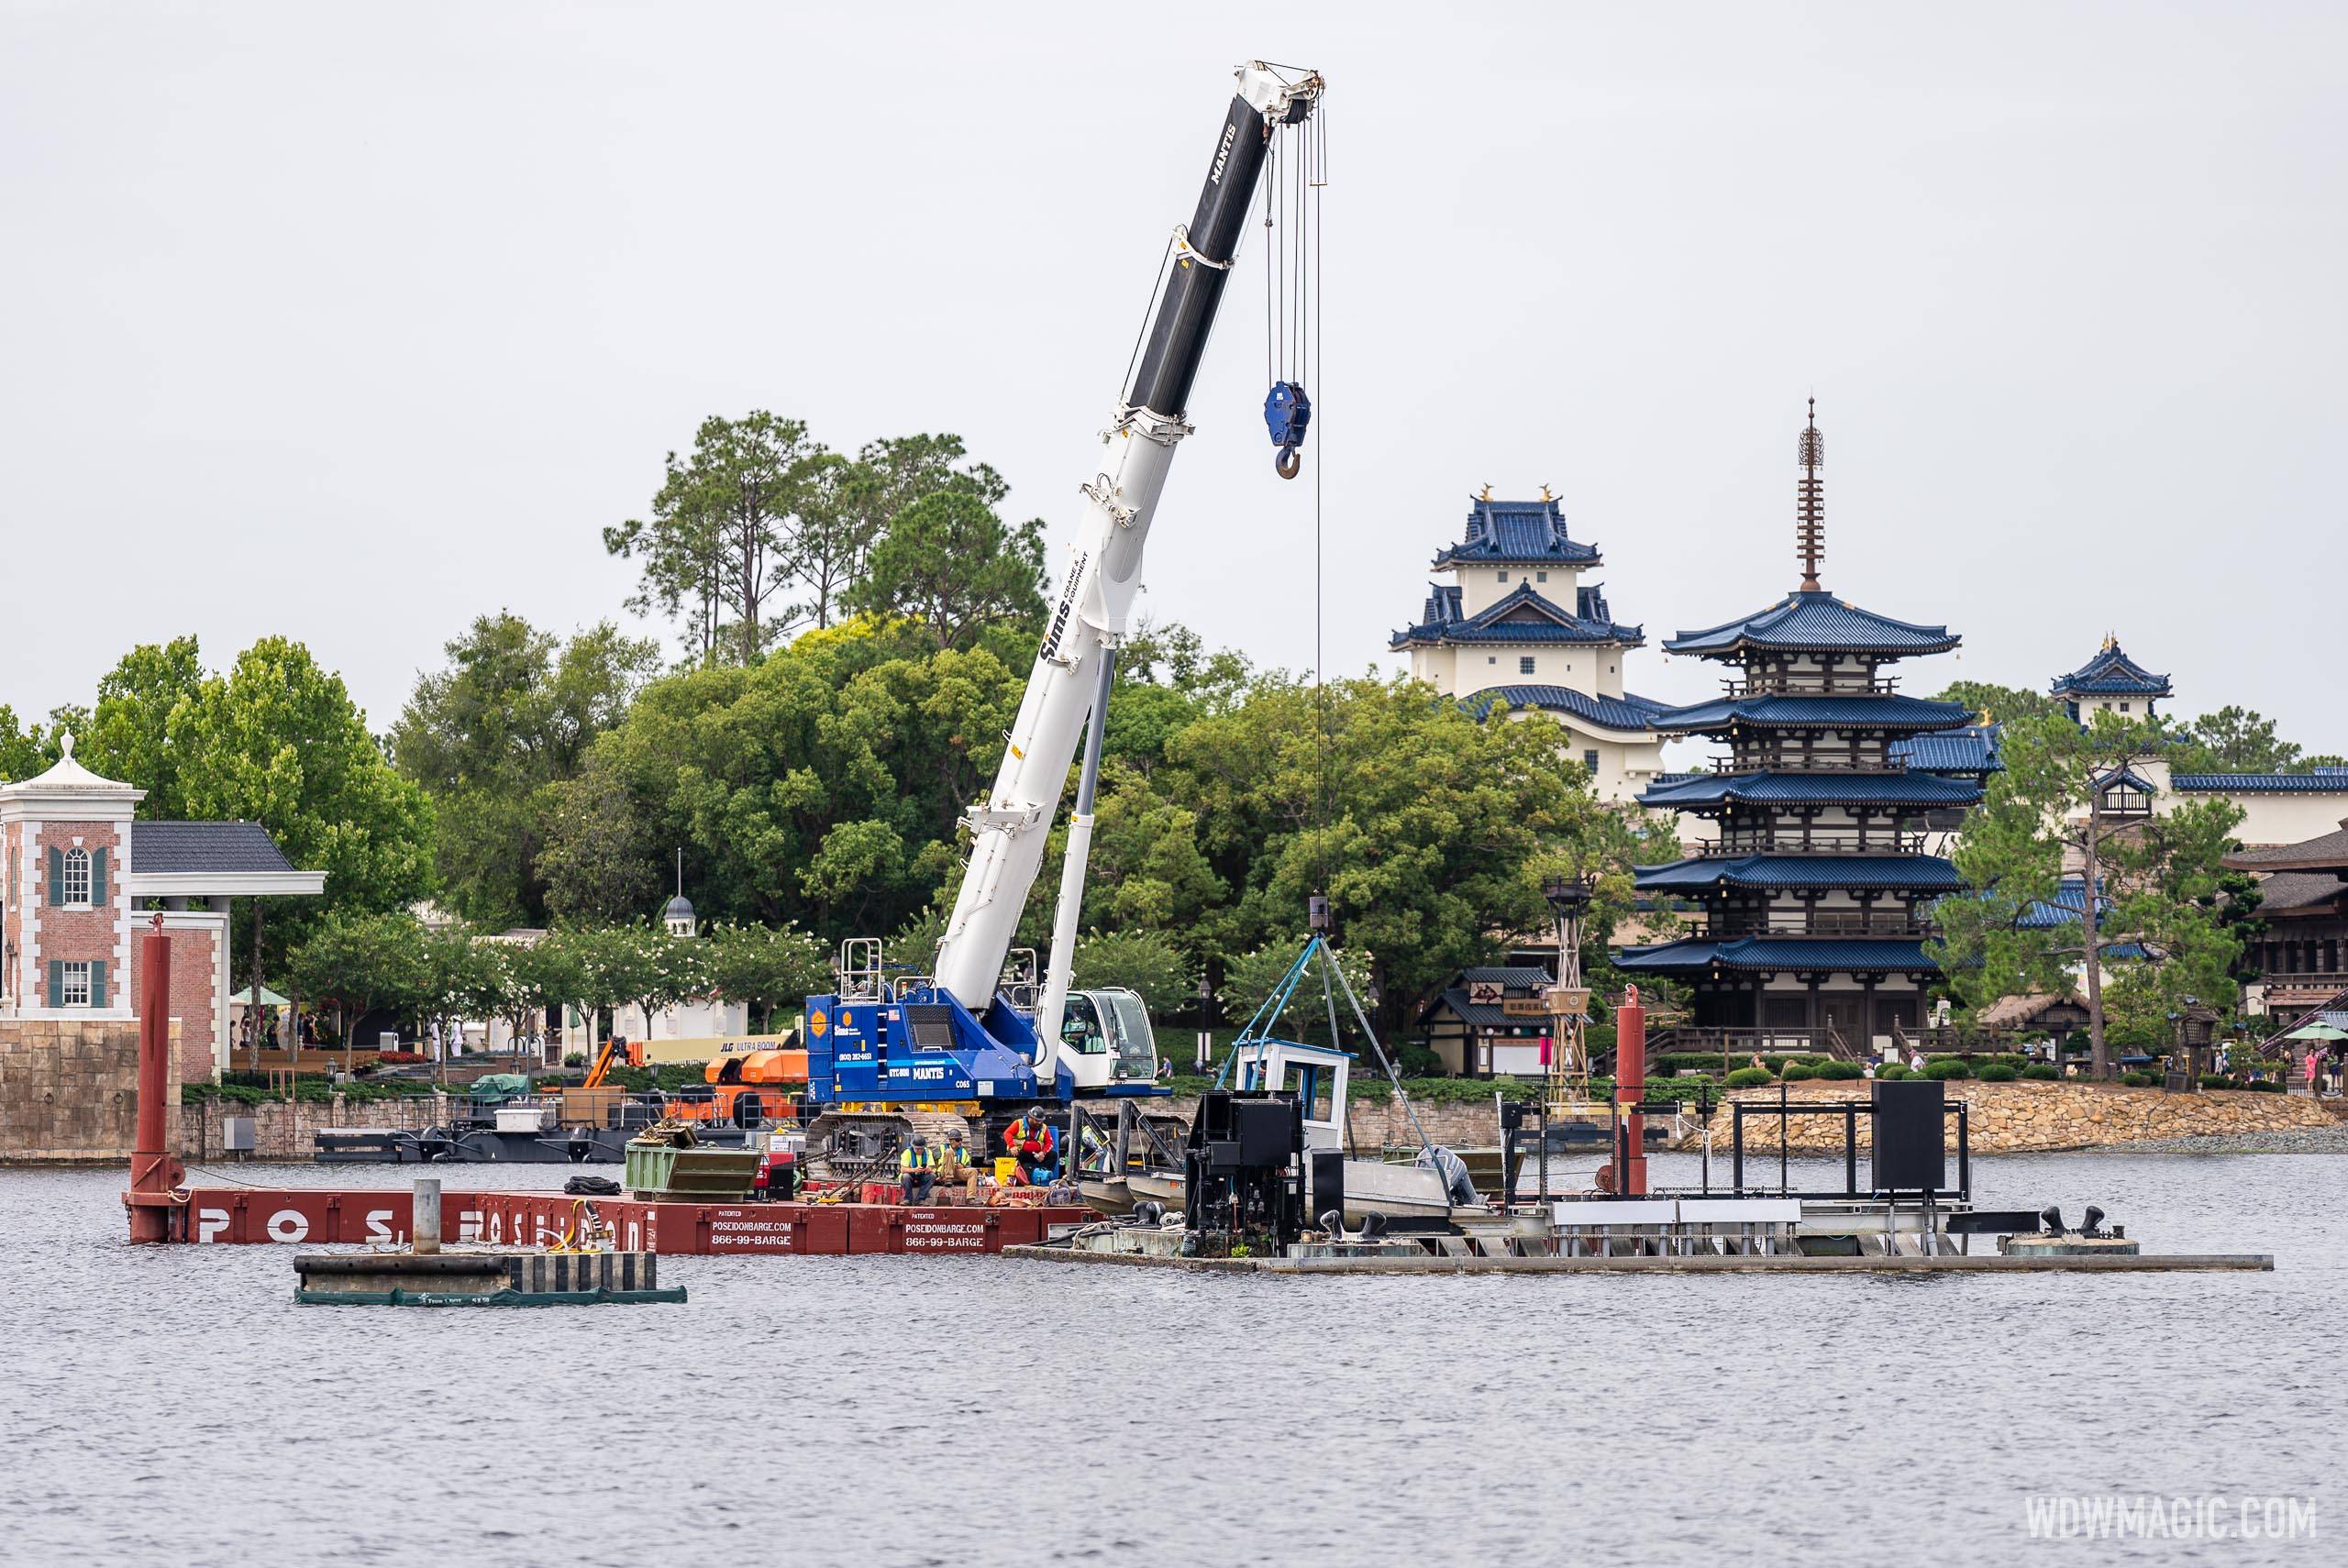 Crane in the center of World Showcase for new firework show infrastructure